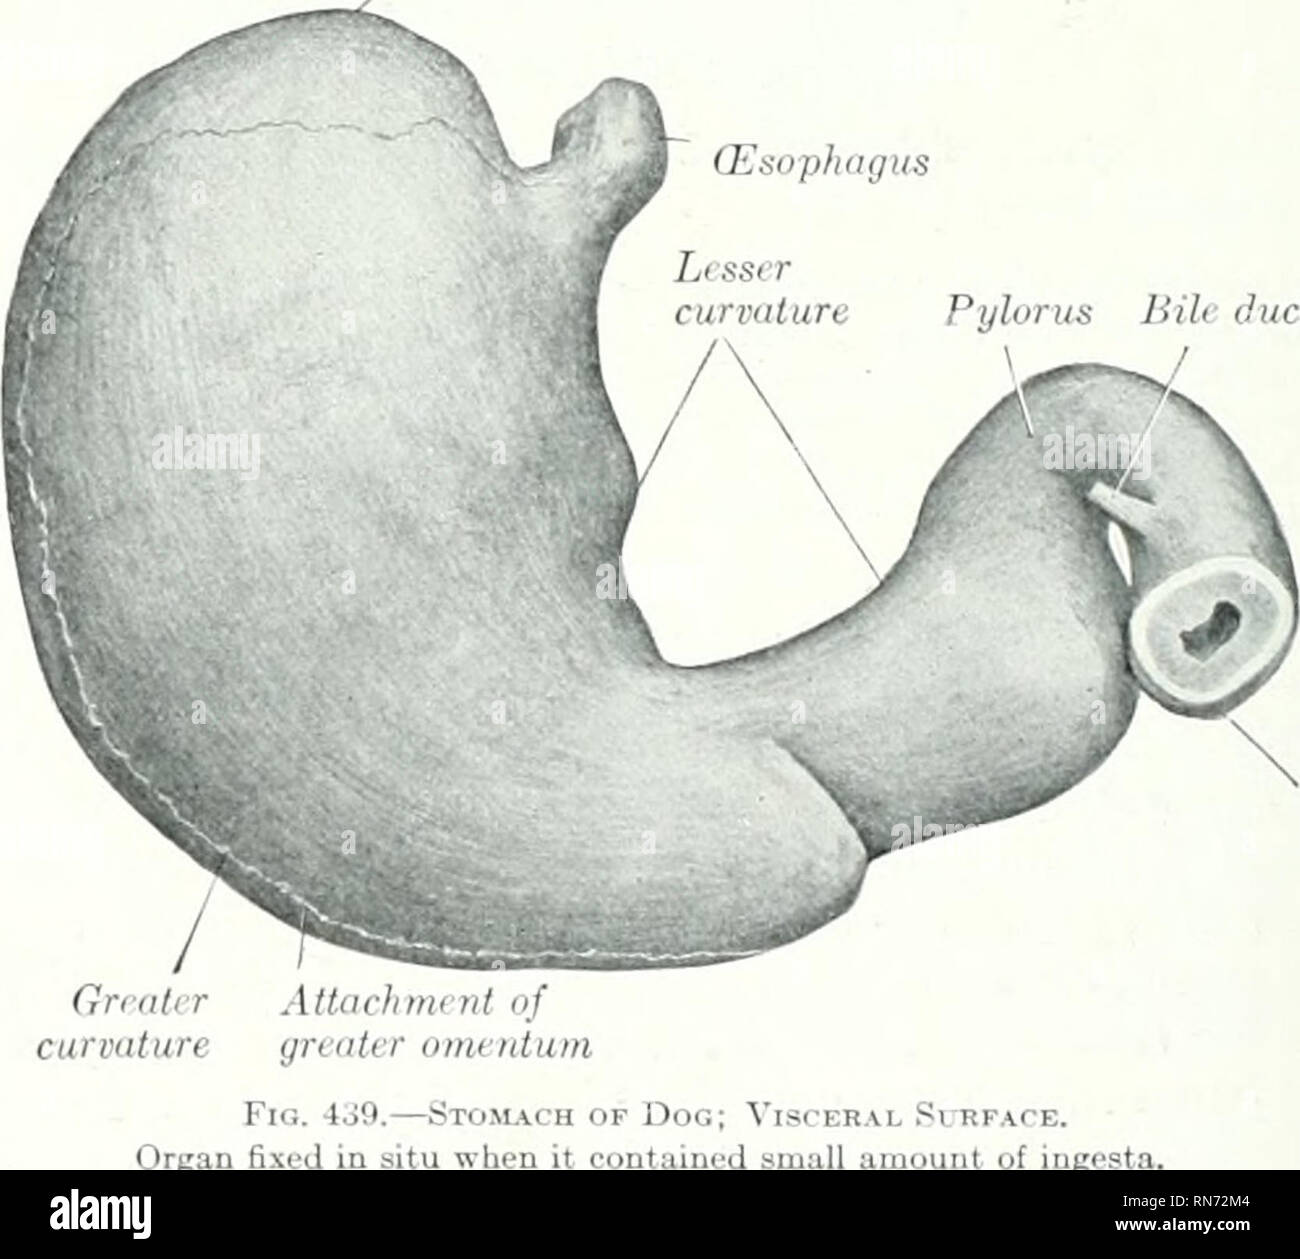 . The anatomy of the domestic animals. Veterinary anatomy. Fig. 4.'iS.—Stom l&gt;rgan fi: or twelfth rili. In this state there is not rarely right and left parts. The precoding topographic statements are based on observations made on a considerable number of formaUn-hardeneil suiijects, and are to be regarded as a-eruge findings in dogs of Left citnmUy (Esophagus. Fig. 439.—Stom. Organ fi.ed in situ when it cont: t of iugfsta. mechnni size. The cardiac and pyloric ends vary least in position, but the former varies the length of one vertebra and the latter as much as two intercostal spaces. T Stock Photo